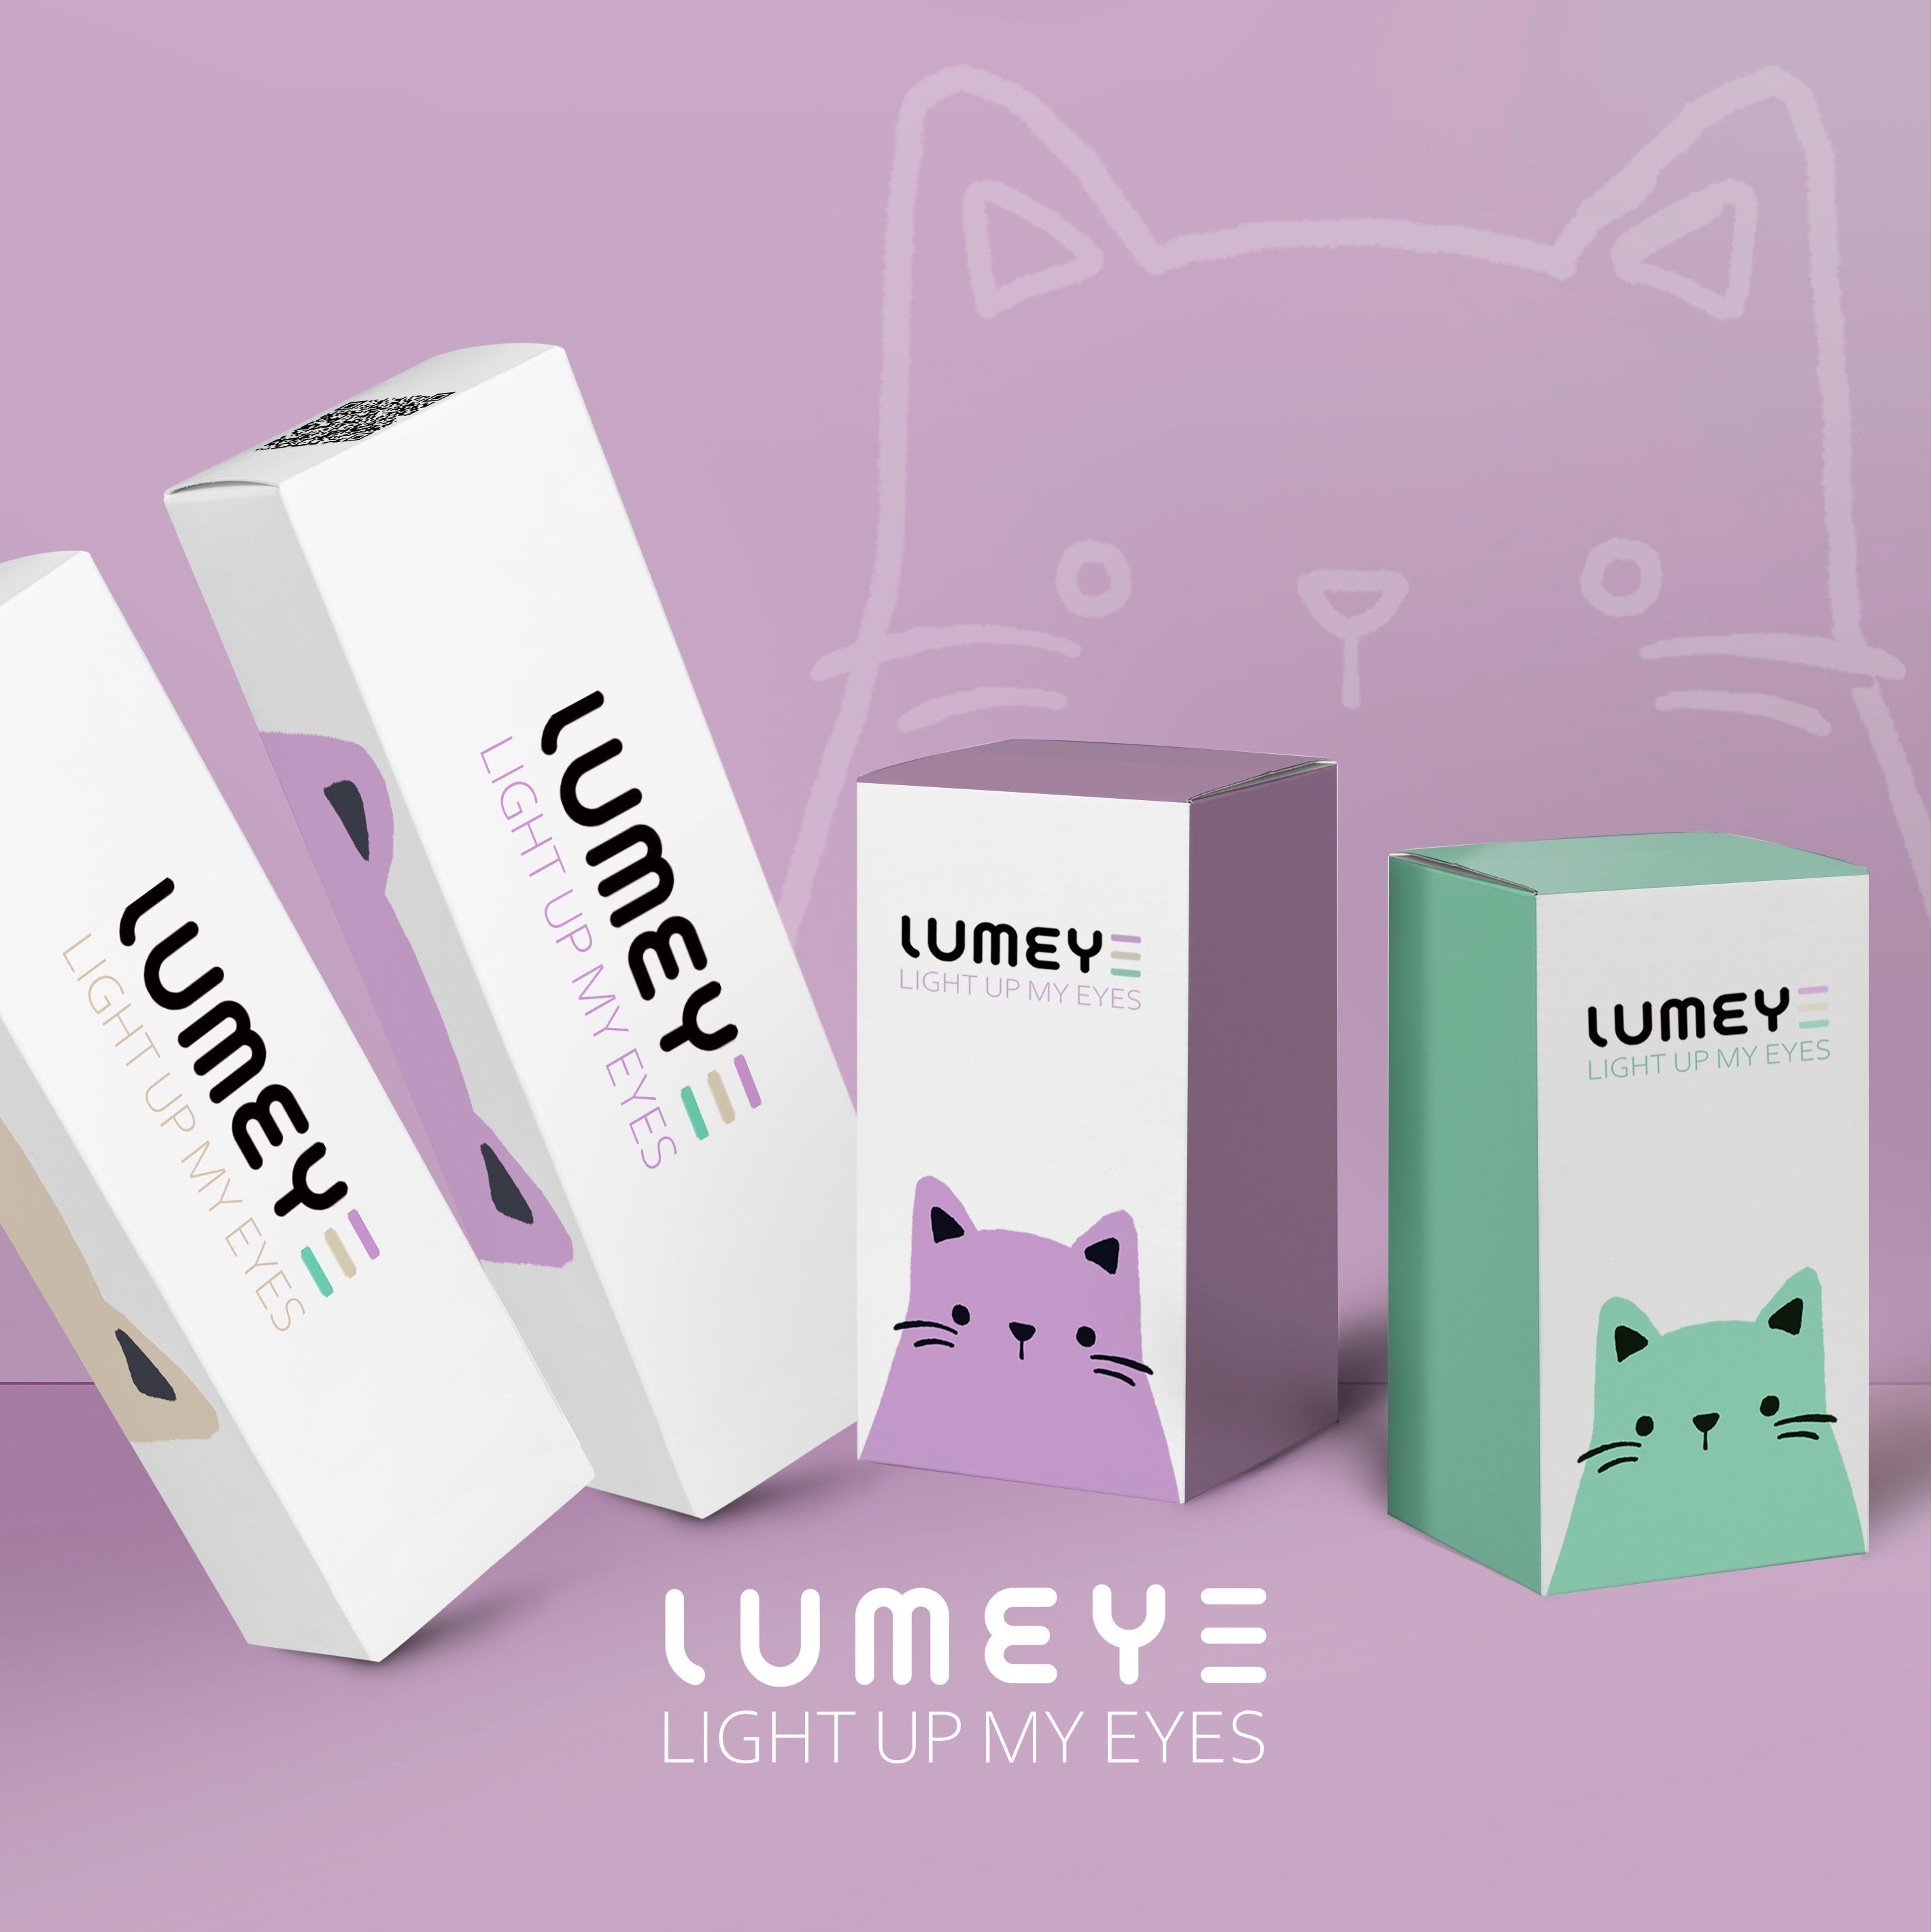 Best COLORED CONTACTS - LUMEYE Muffin Brown Colored Contact Lenses - LUMEYE